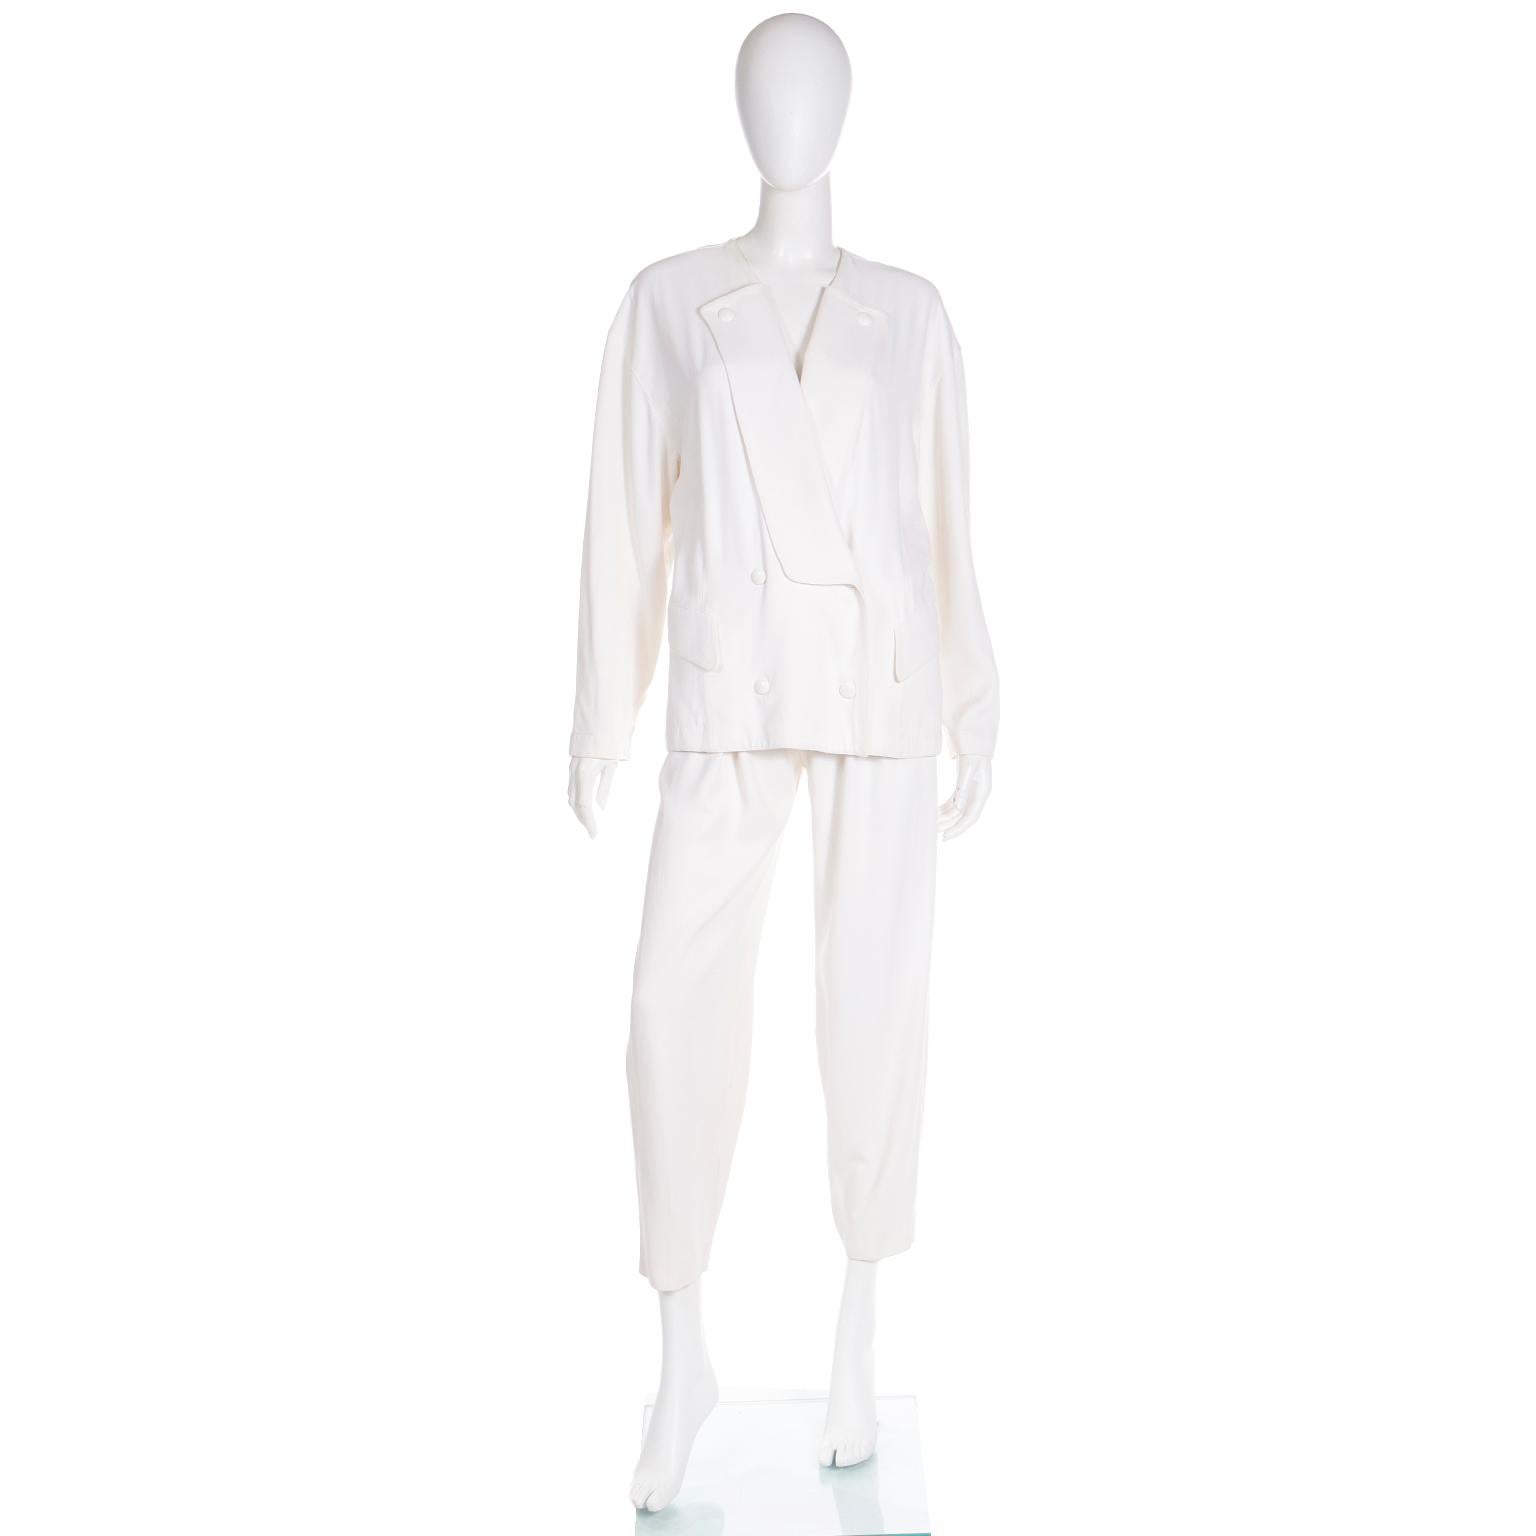 We love the way this vintage Thierry Mugler ivory cotton gabardine 2 piece suit is so easy to wear! The jacket has so much style and can be worn with so many other separates in your wardrobe. 

The double breasted jacket has Mugler's signature snaps